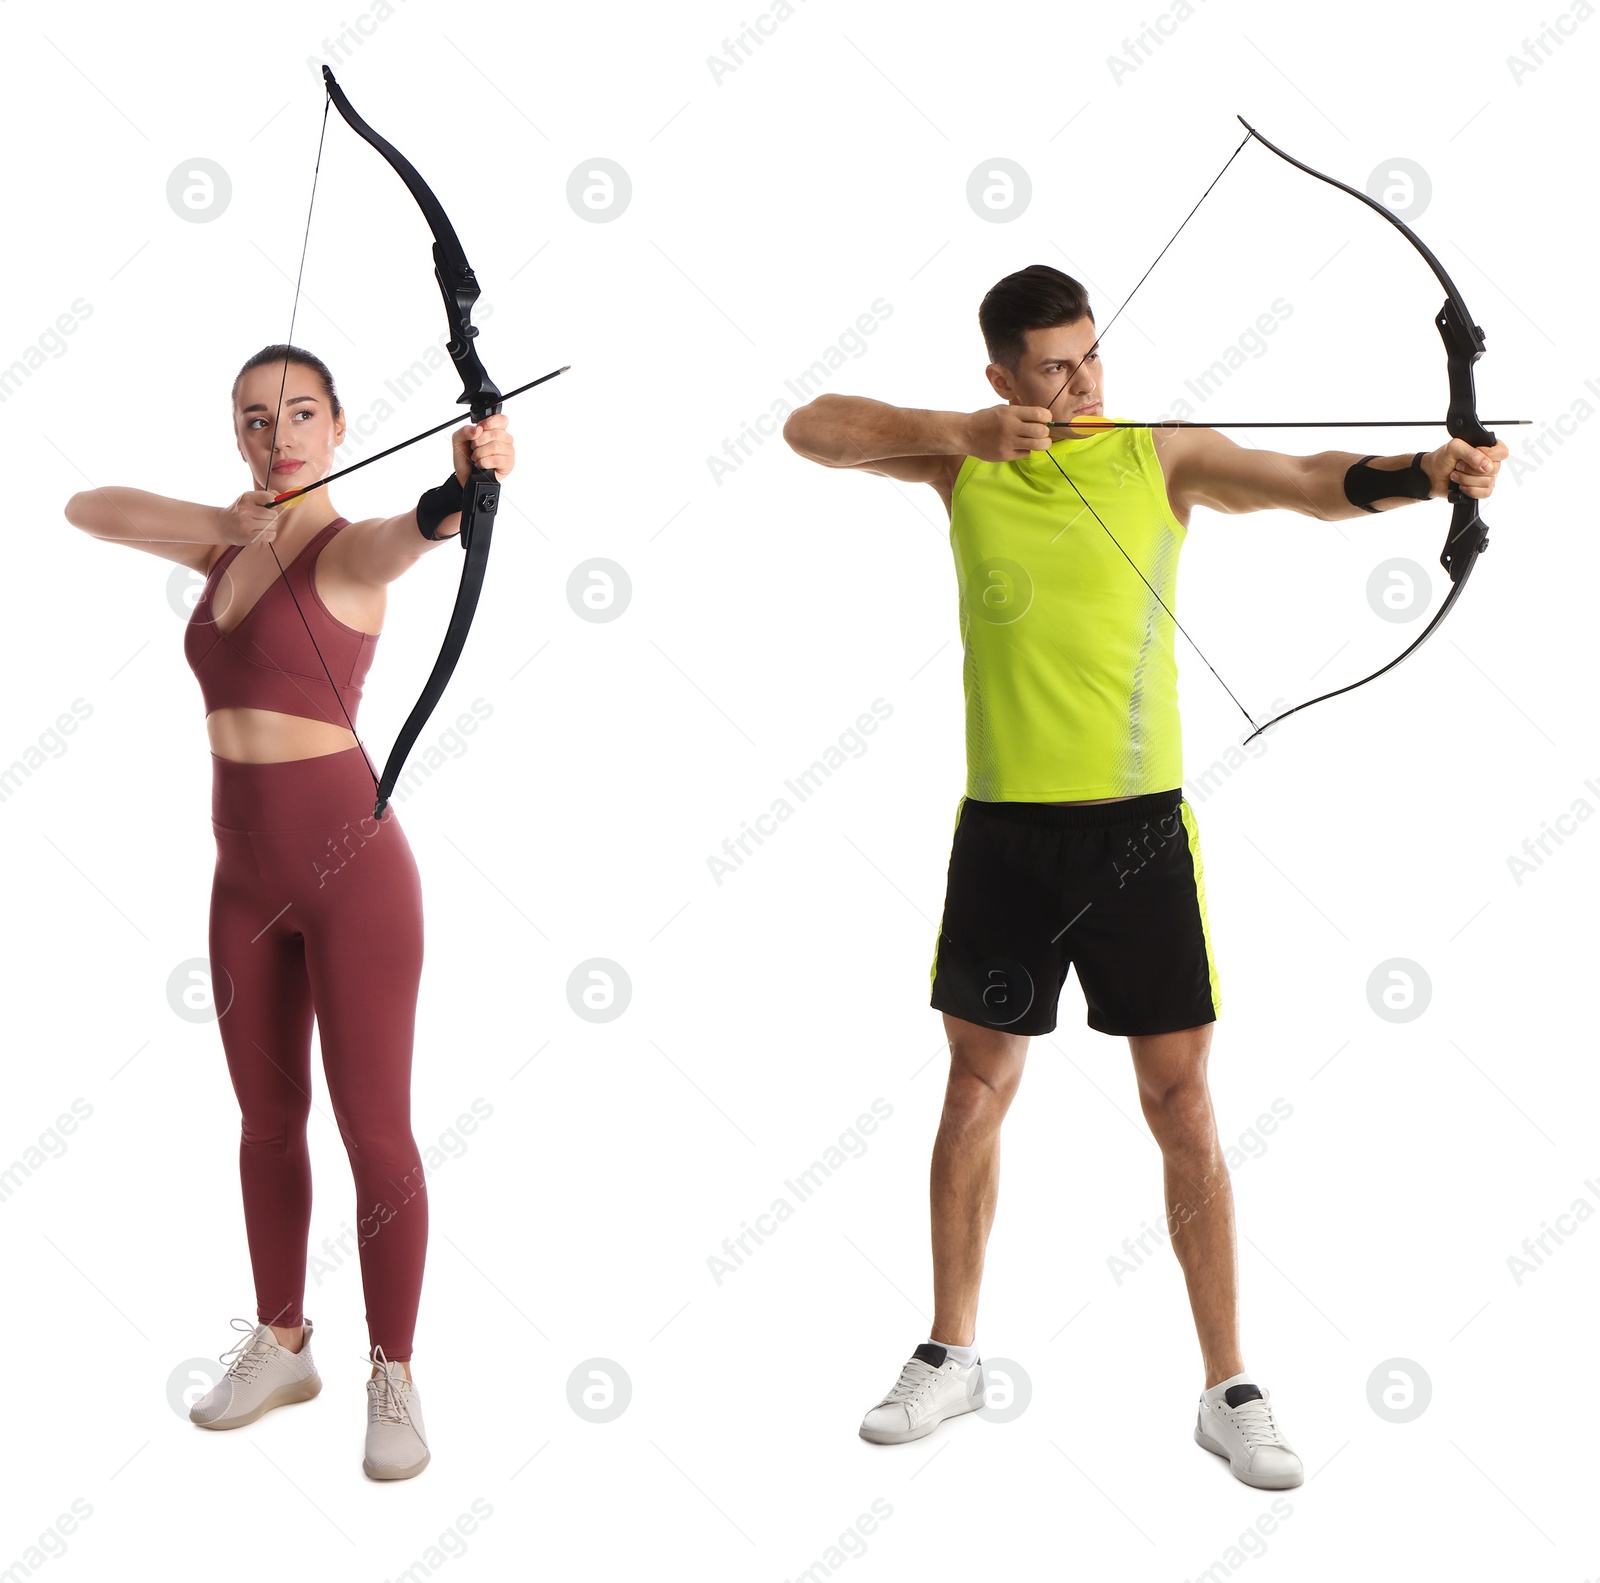 Image of People practicing archery on white background, collage